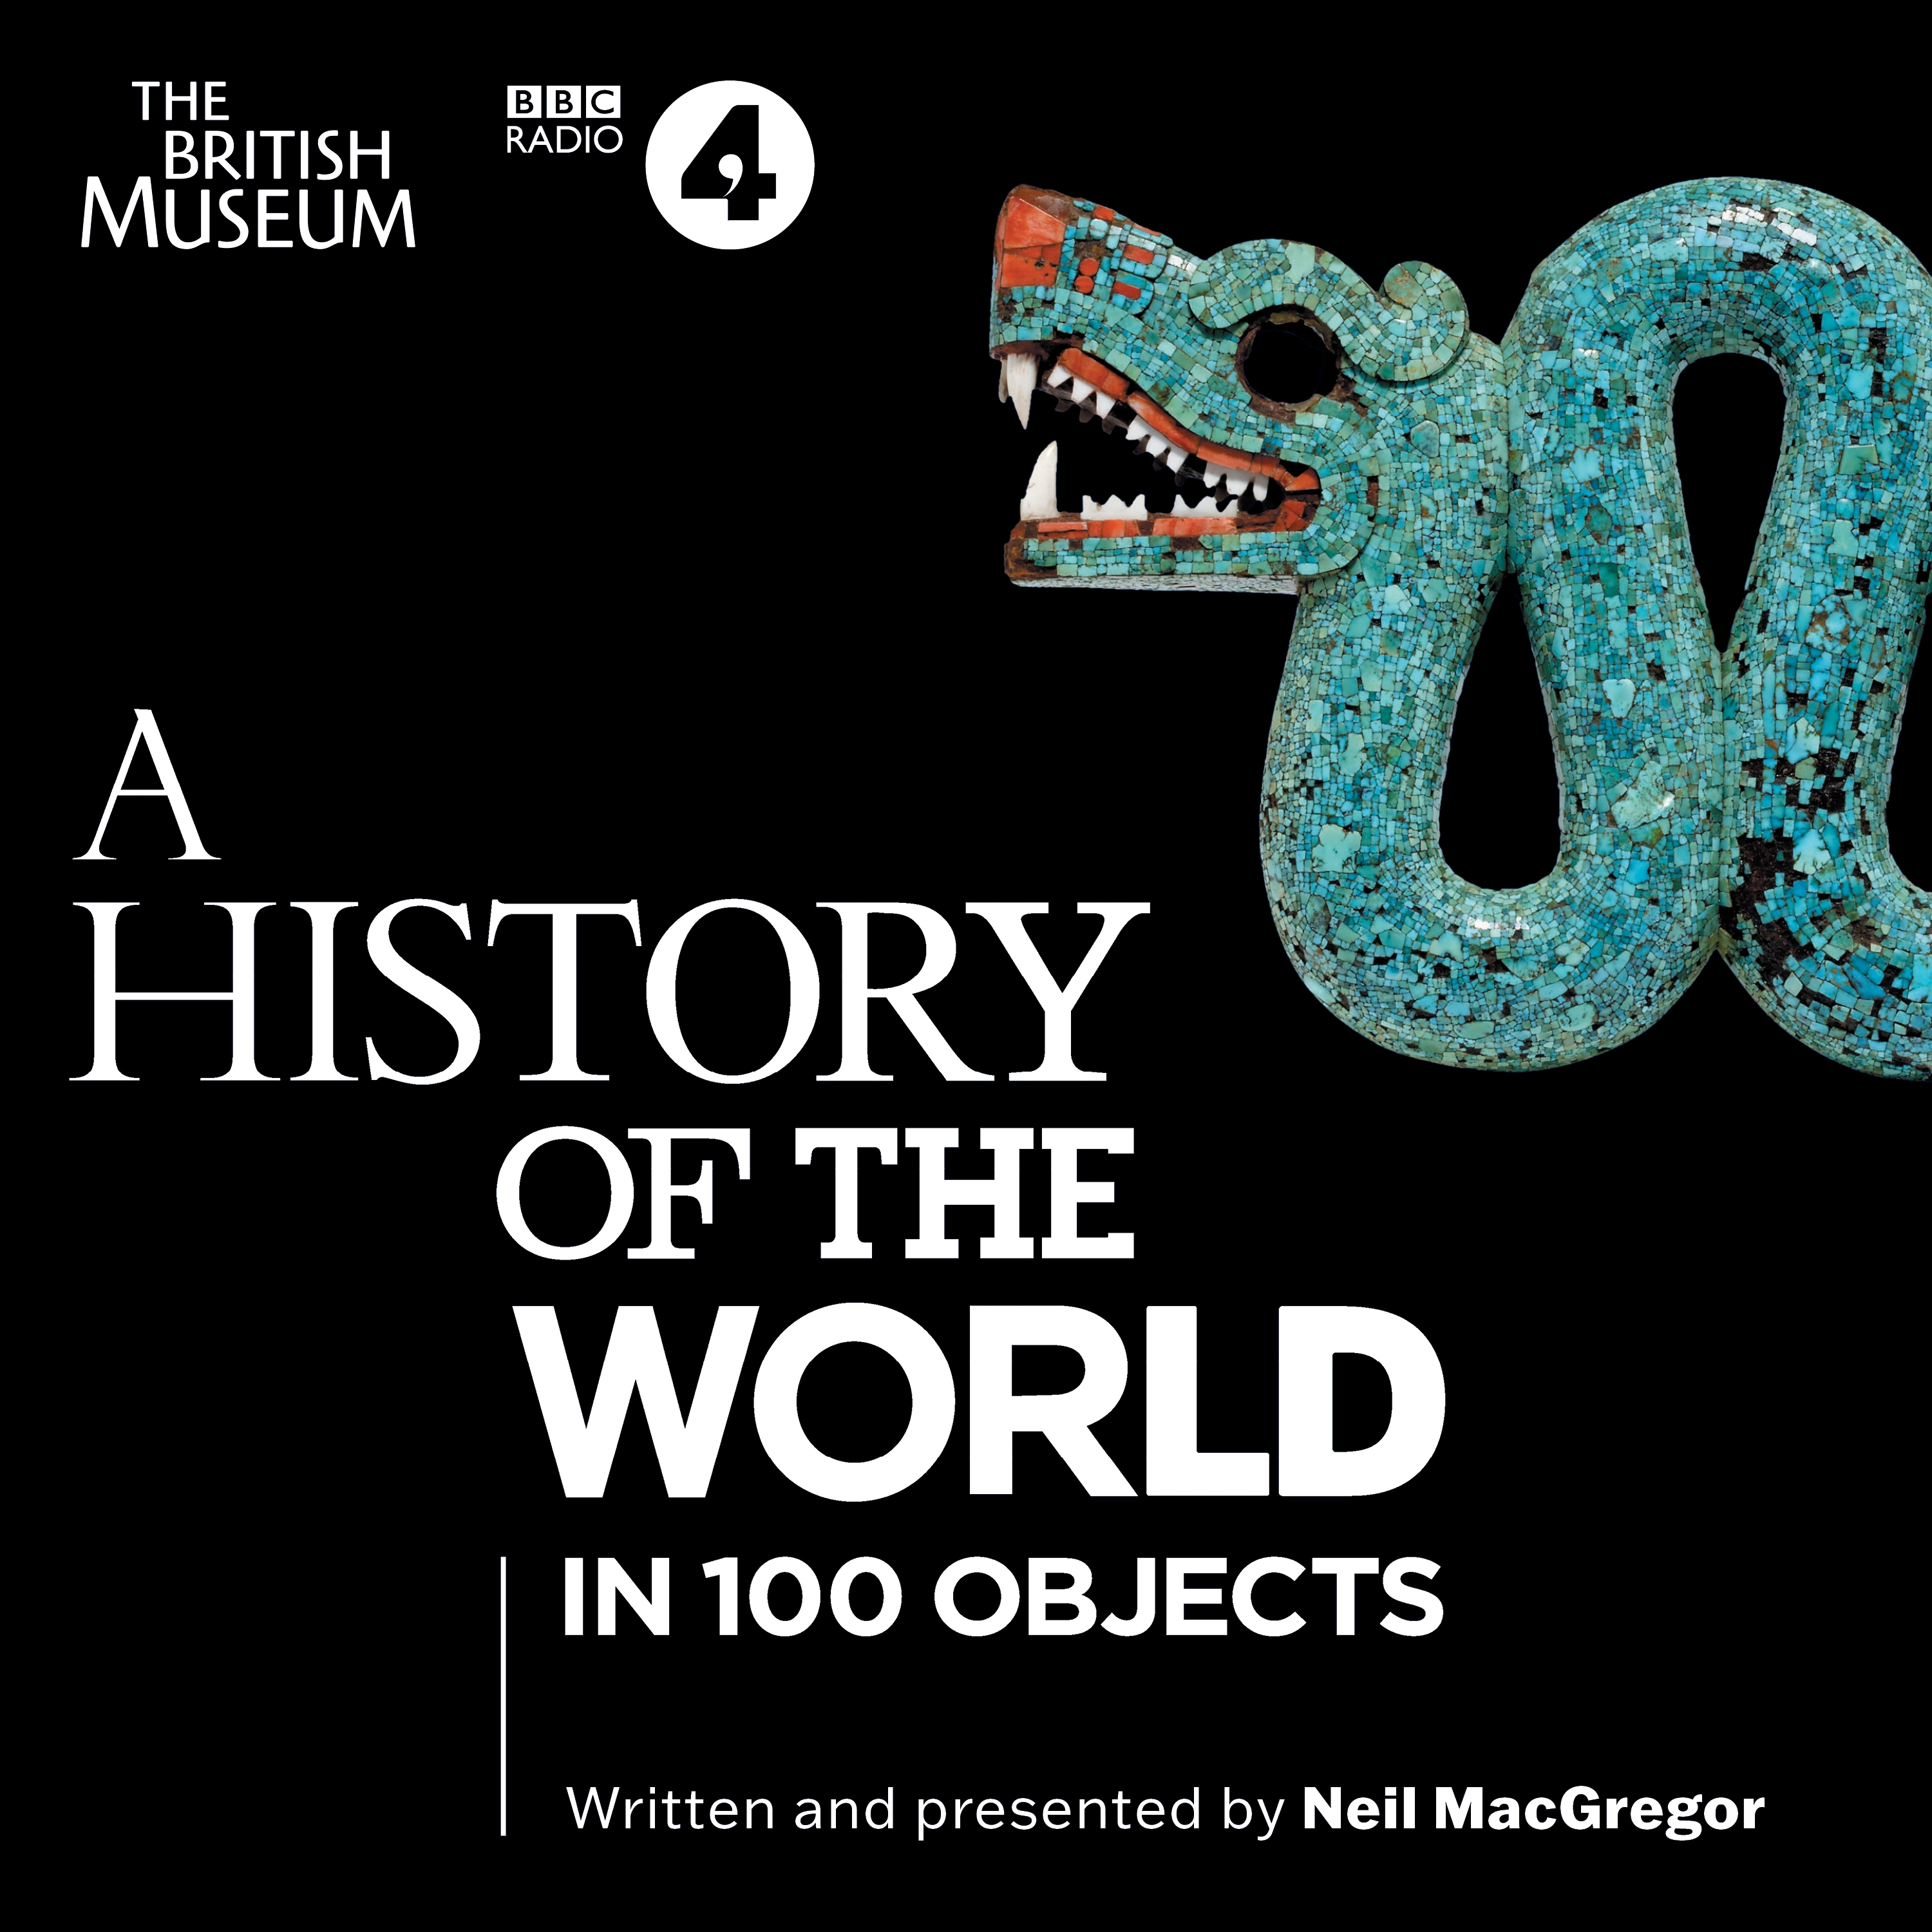 Audiobook cover for A History of the World in 100 Objects: black cover with a jade green snake ornament on the right, and the title stacked in white font along the left.